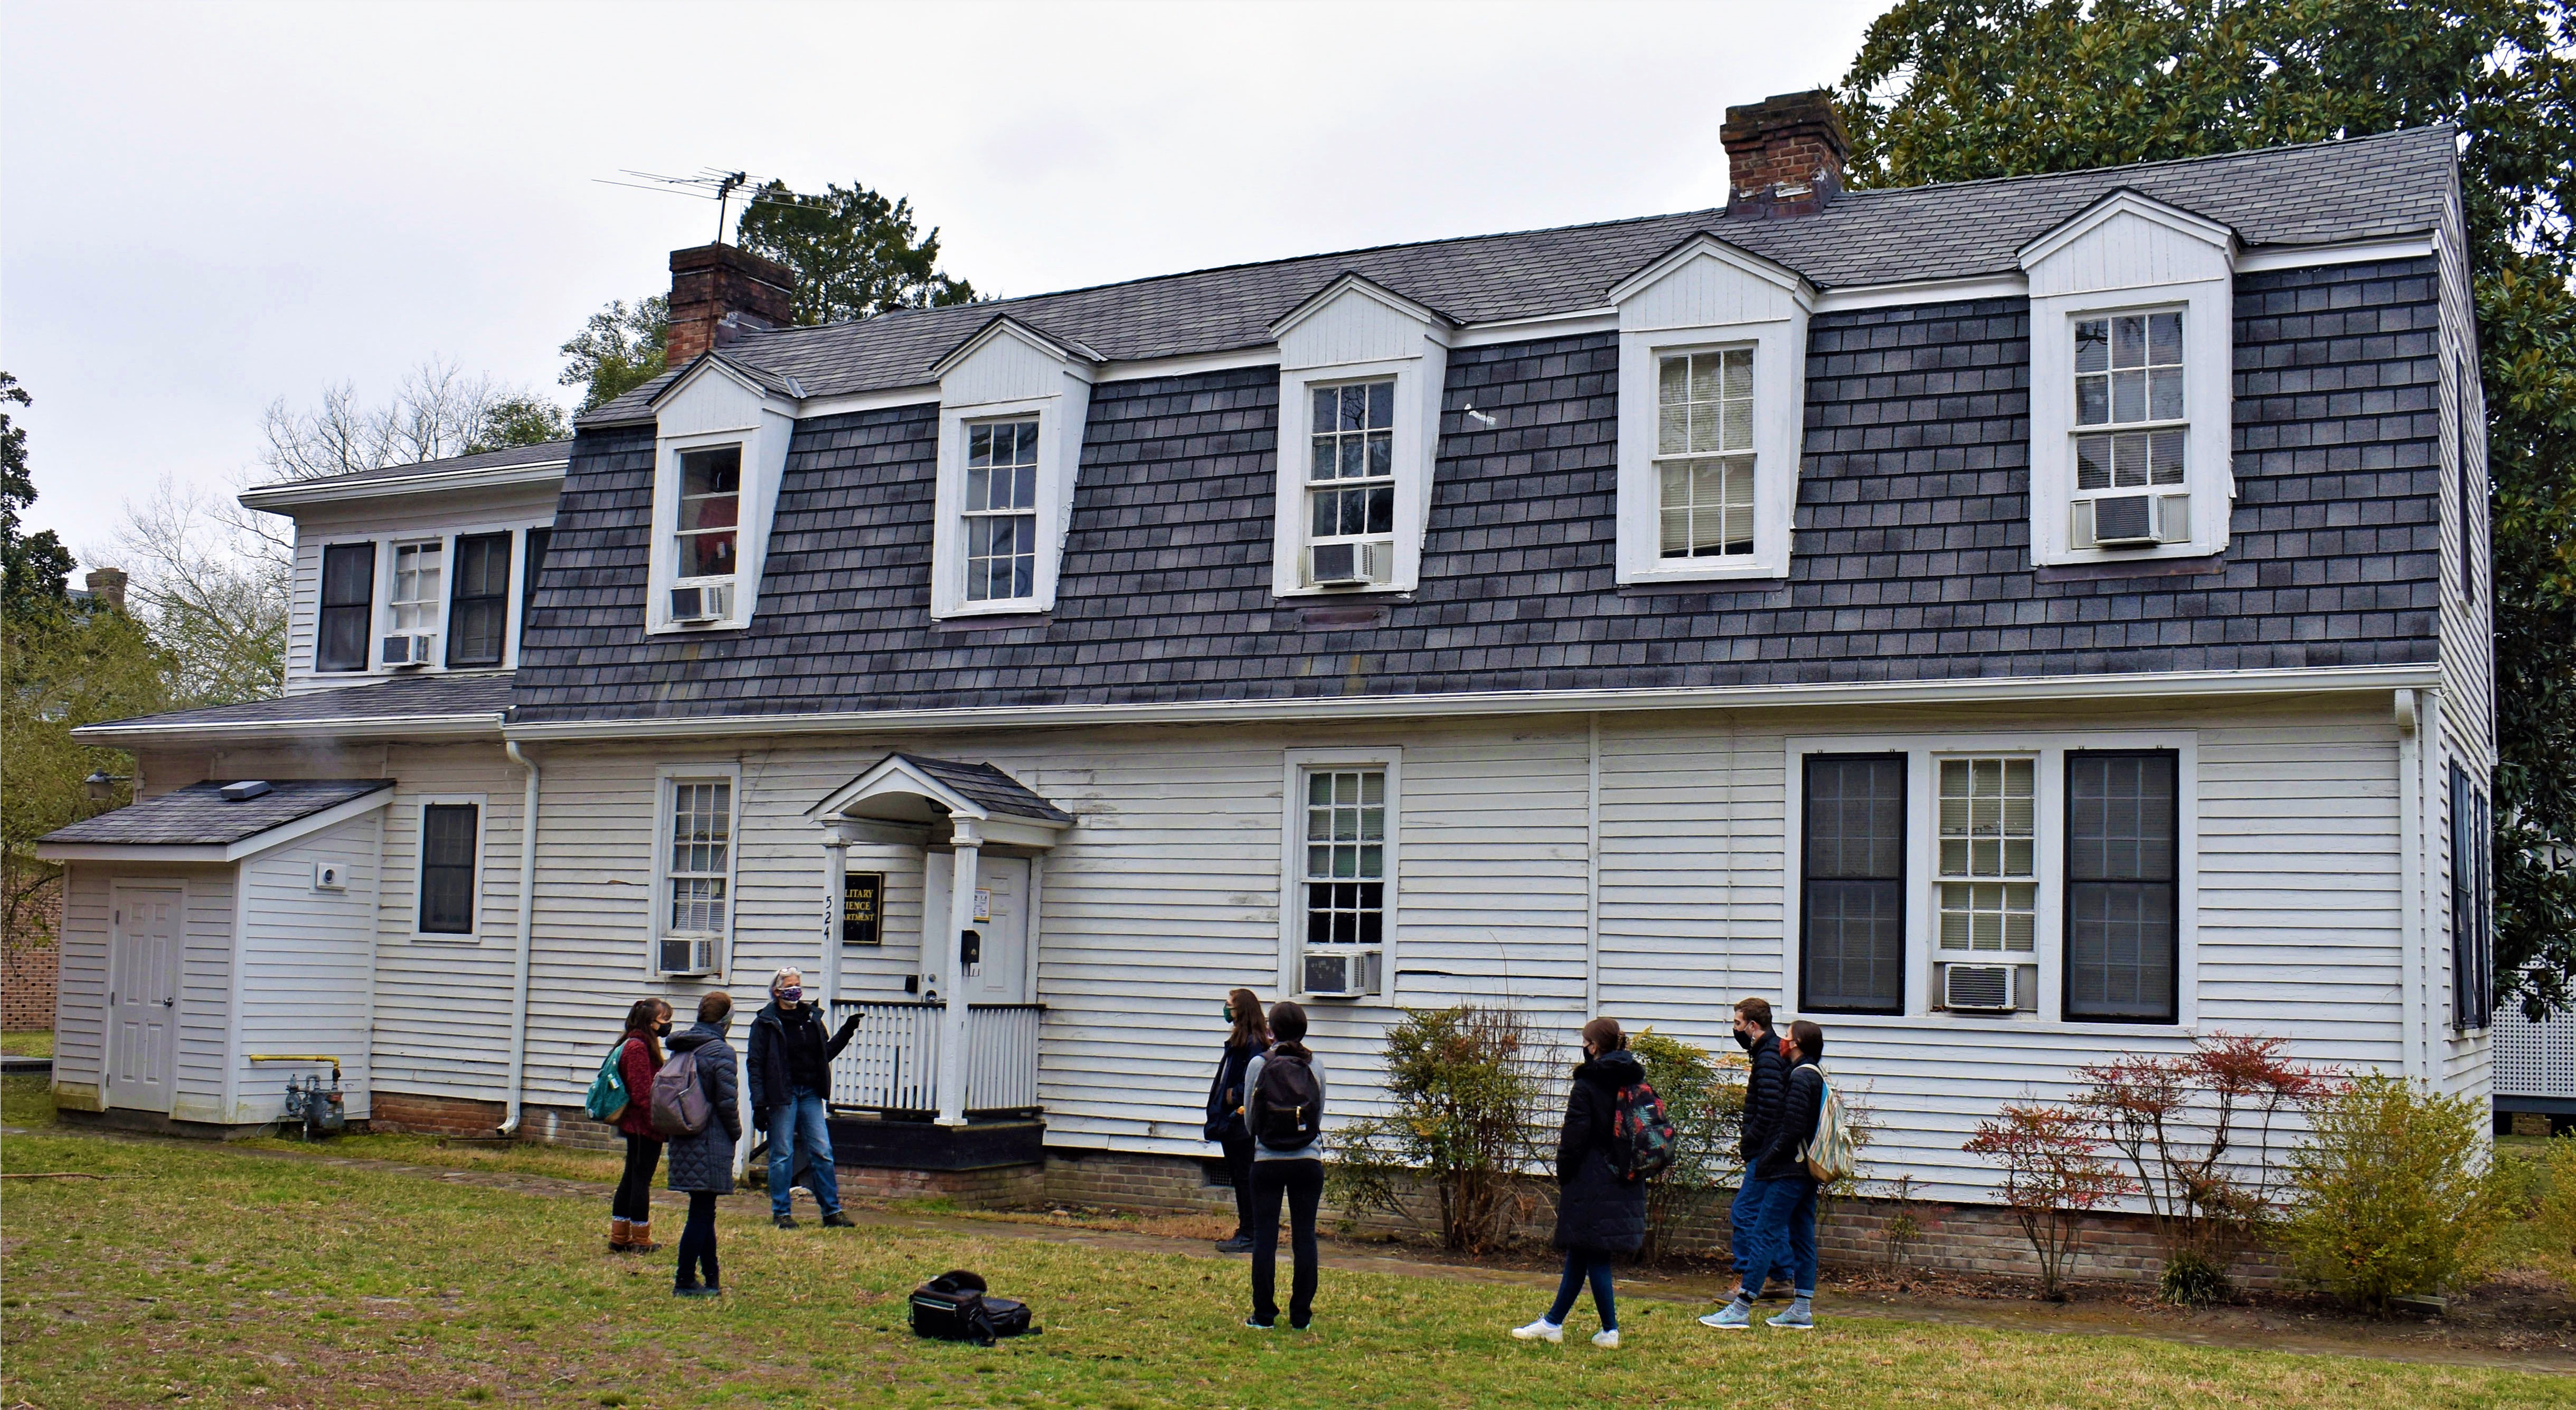 Early American Architecture Students at Bray-Digges House. Students in Prof. Lounsbury's class, learned the basic fundamentals of how to “read” a building to understand the social and cultural intentions of those who commissioned or built it, how it may have been altered over the years to fit new patterns of use, and the historical implications of those changes.